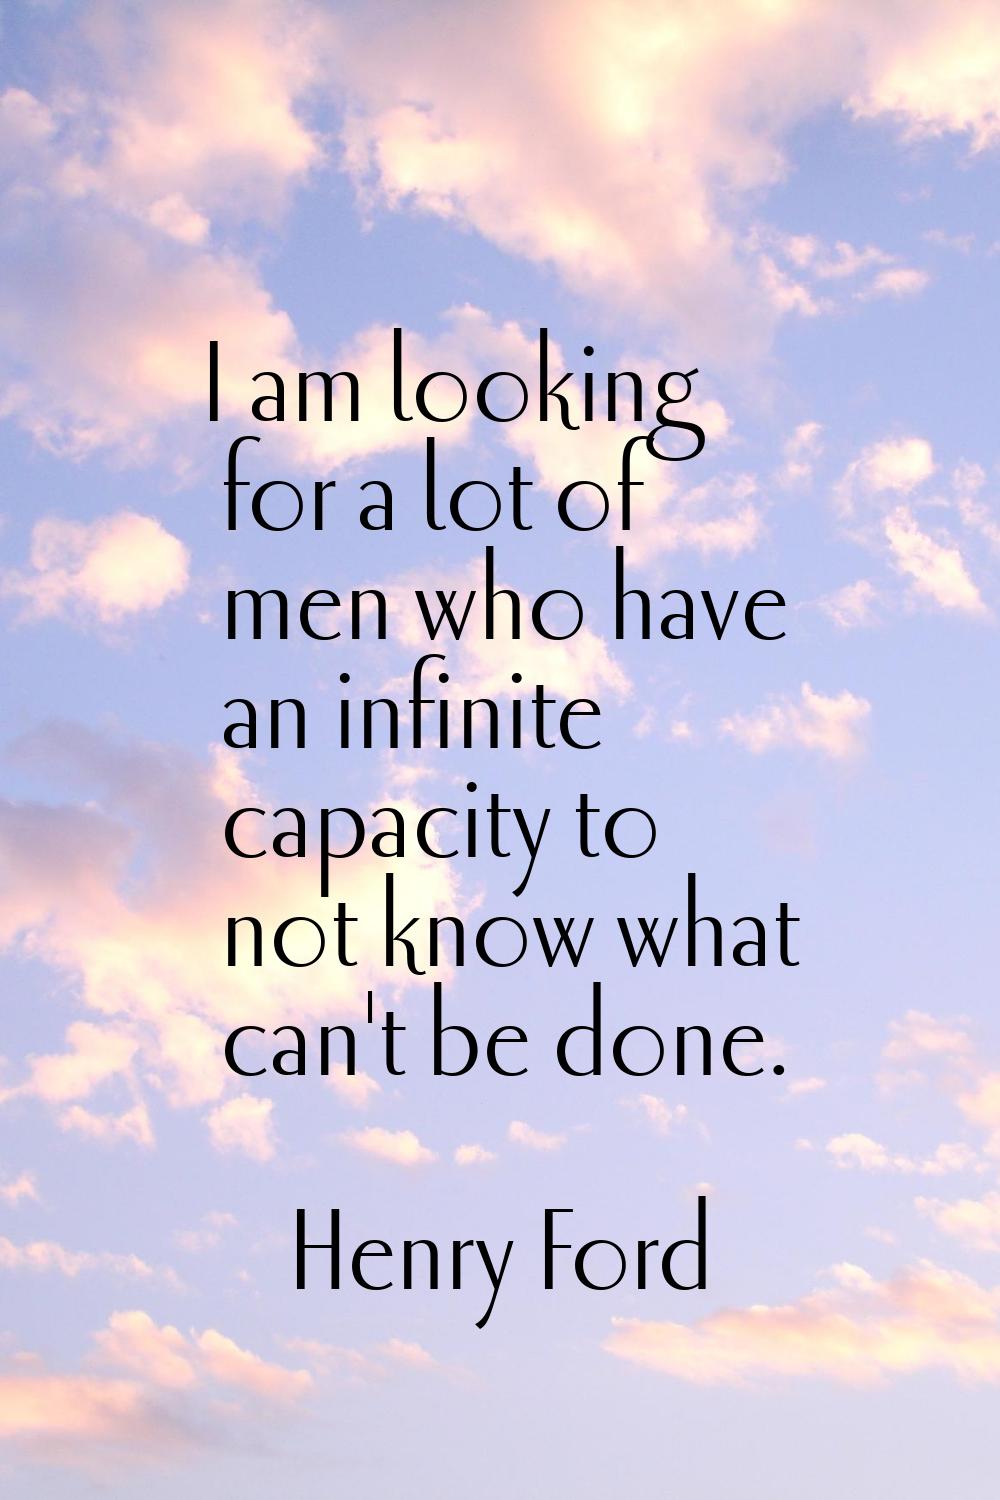 I am looking for a lot of men who have an infinite capacity to not know what can't be done.